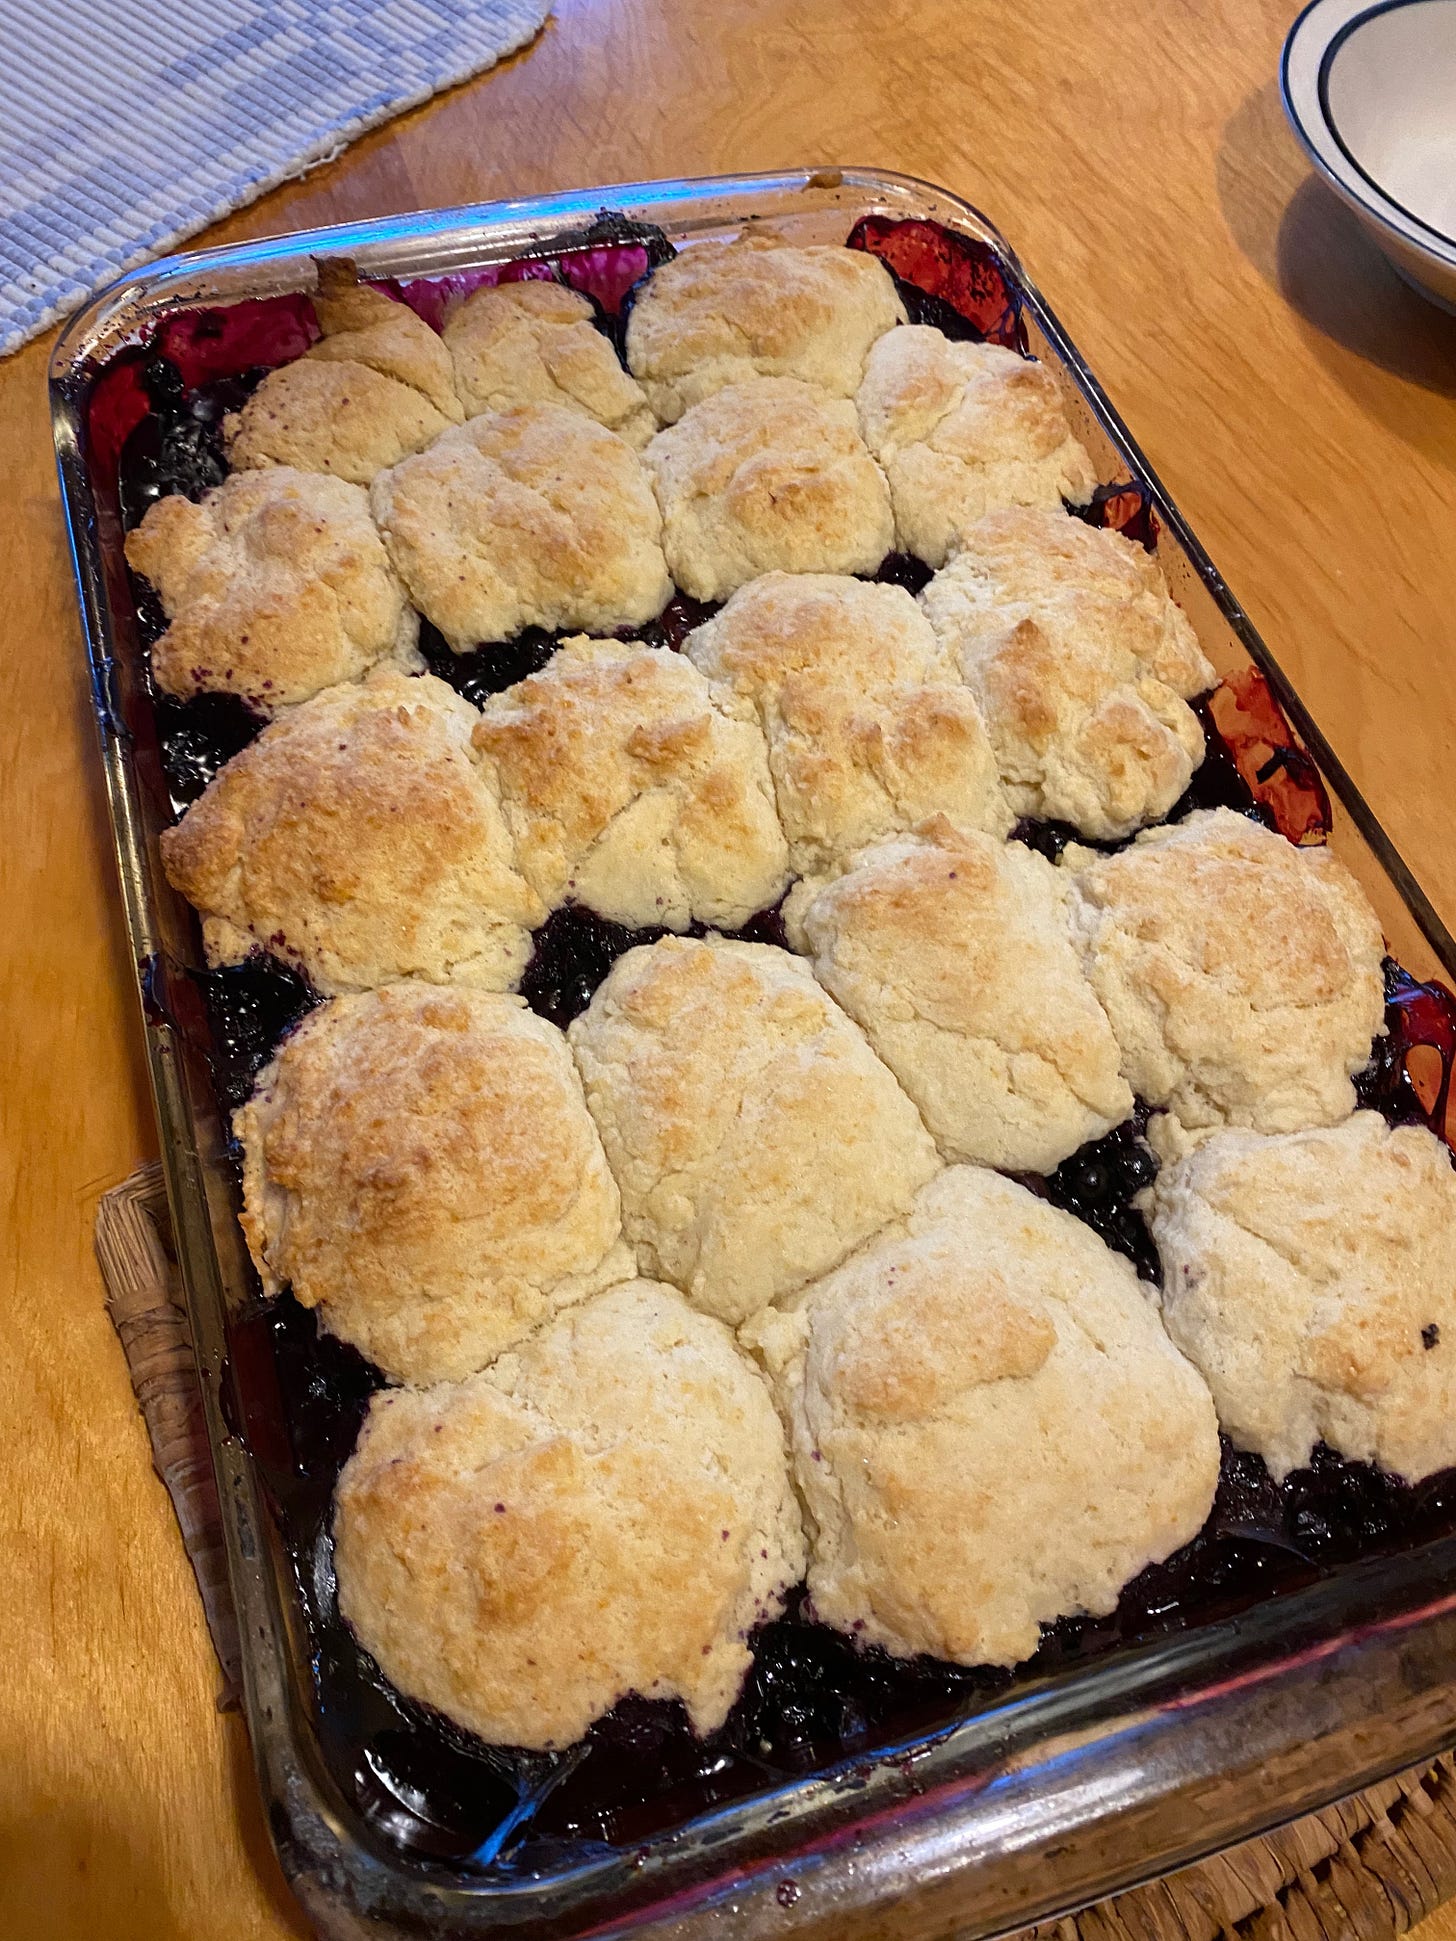 A glass baking dish of blueberry cobbler: small round mounds of golden brown biscuit topping sit atop bubbling, deep purple blueberries.